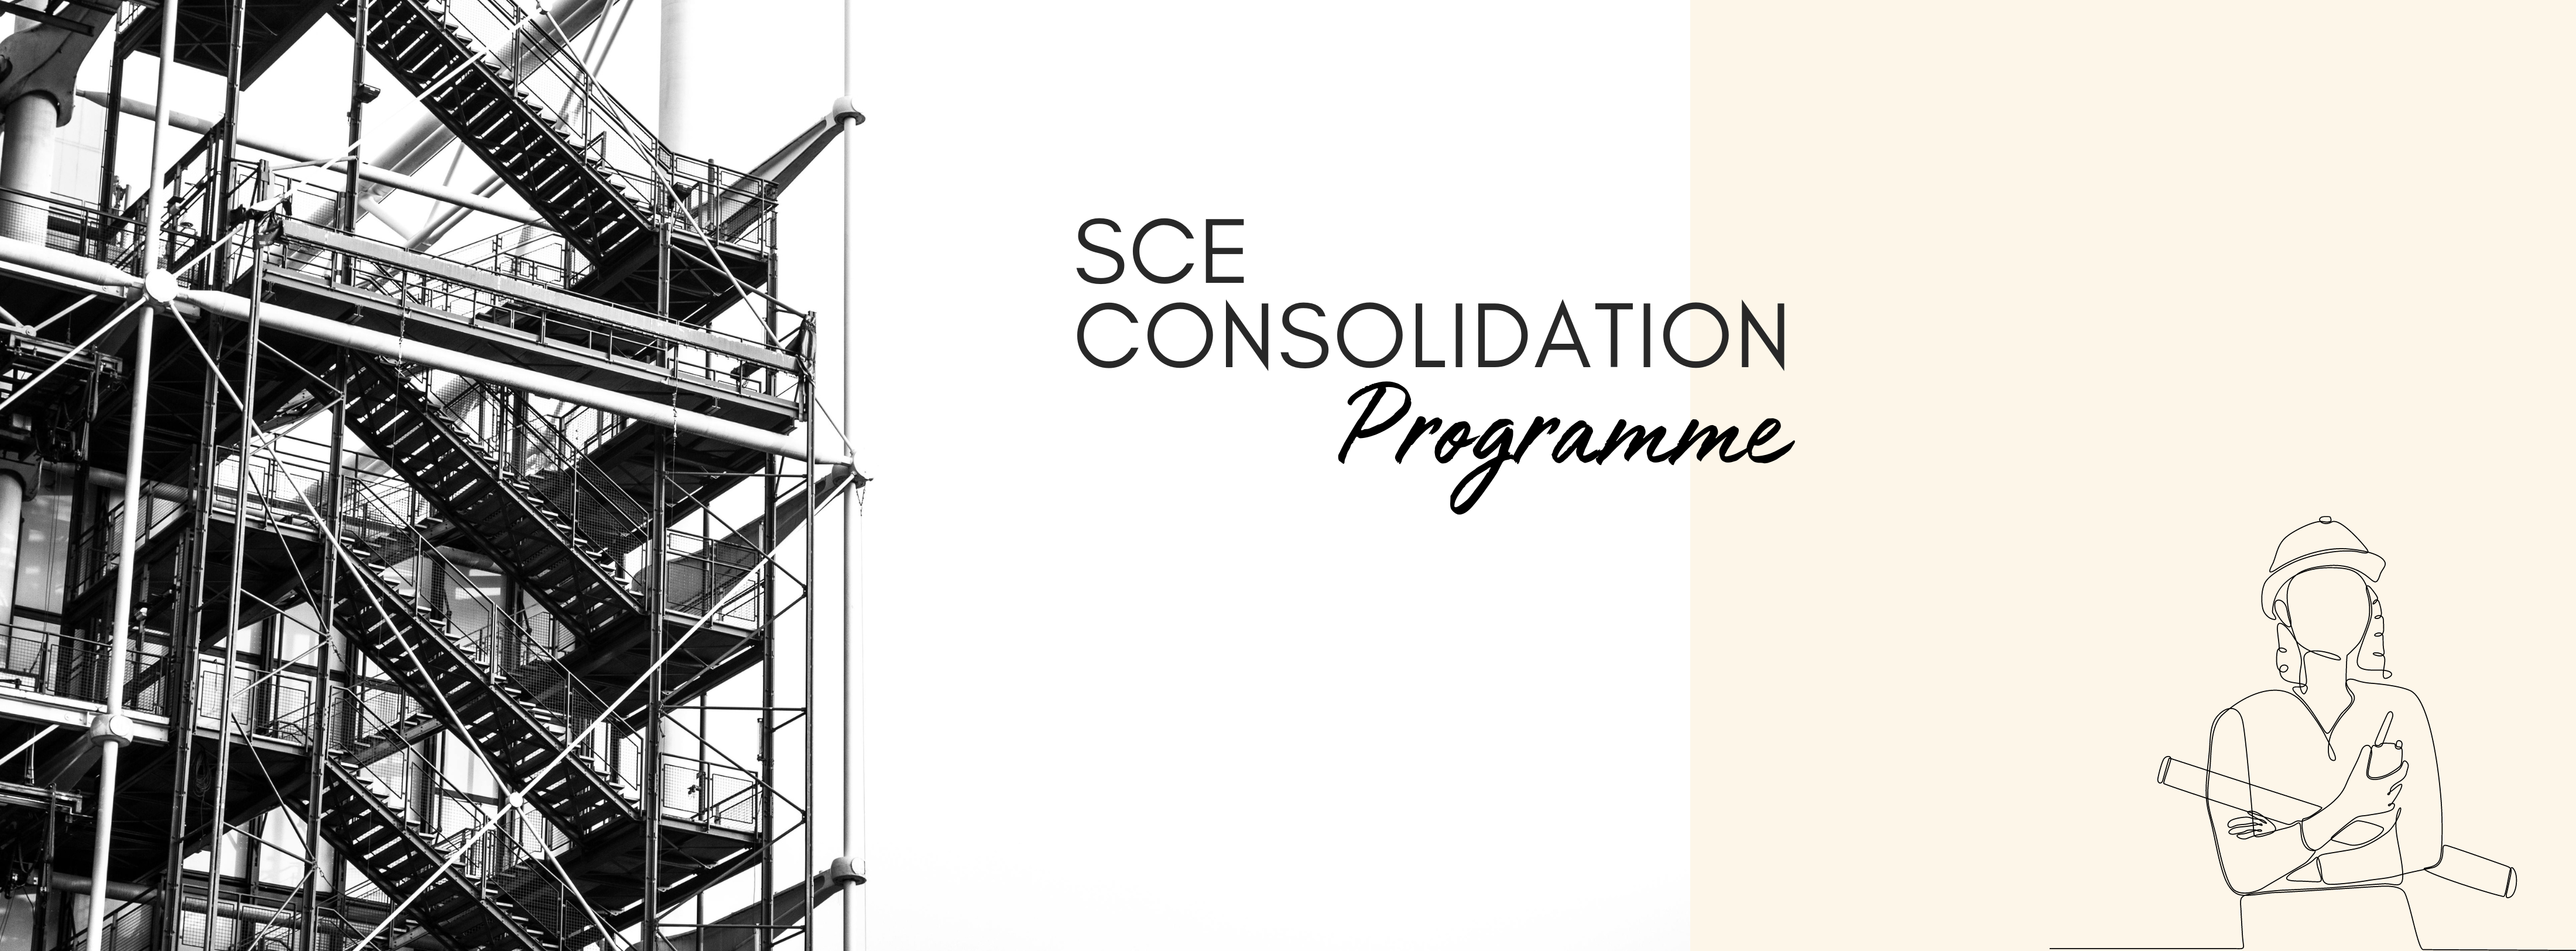 SCE Consolidation programme